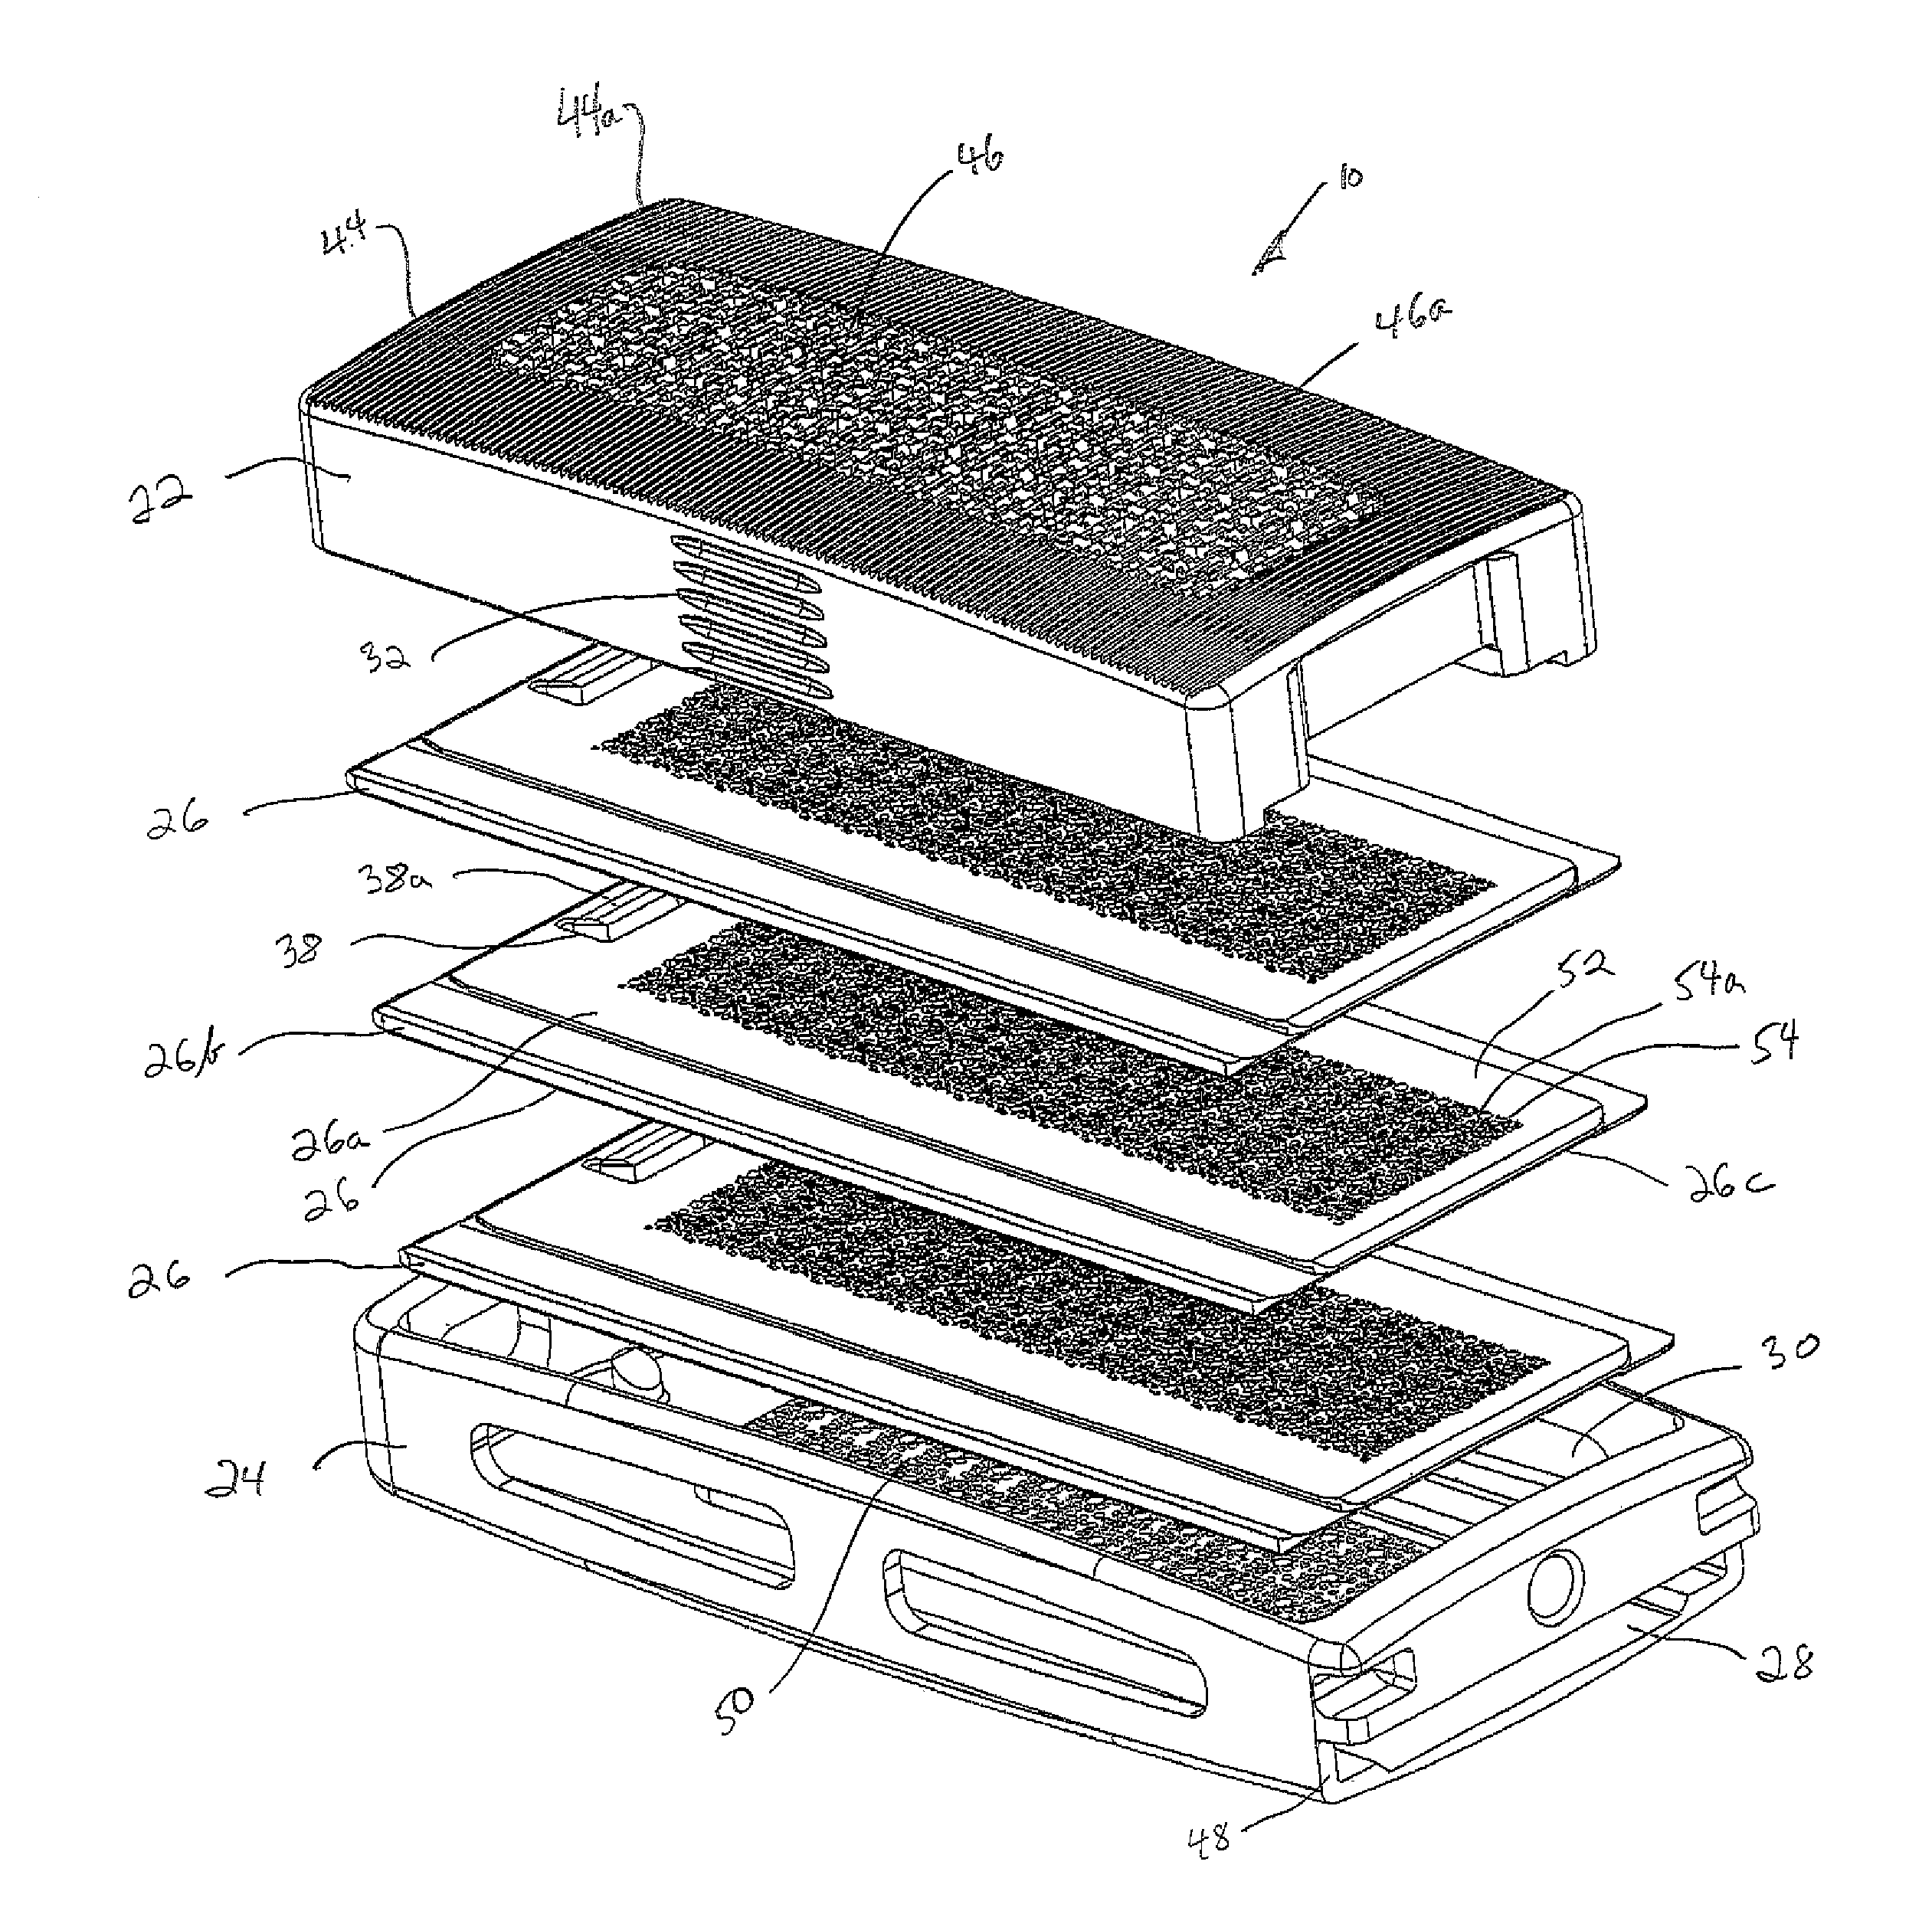 Method of expanding an intradiscal space and providing an osteoconductive path during expansion